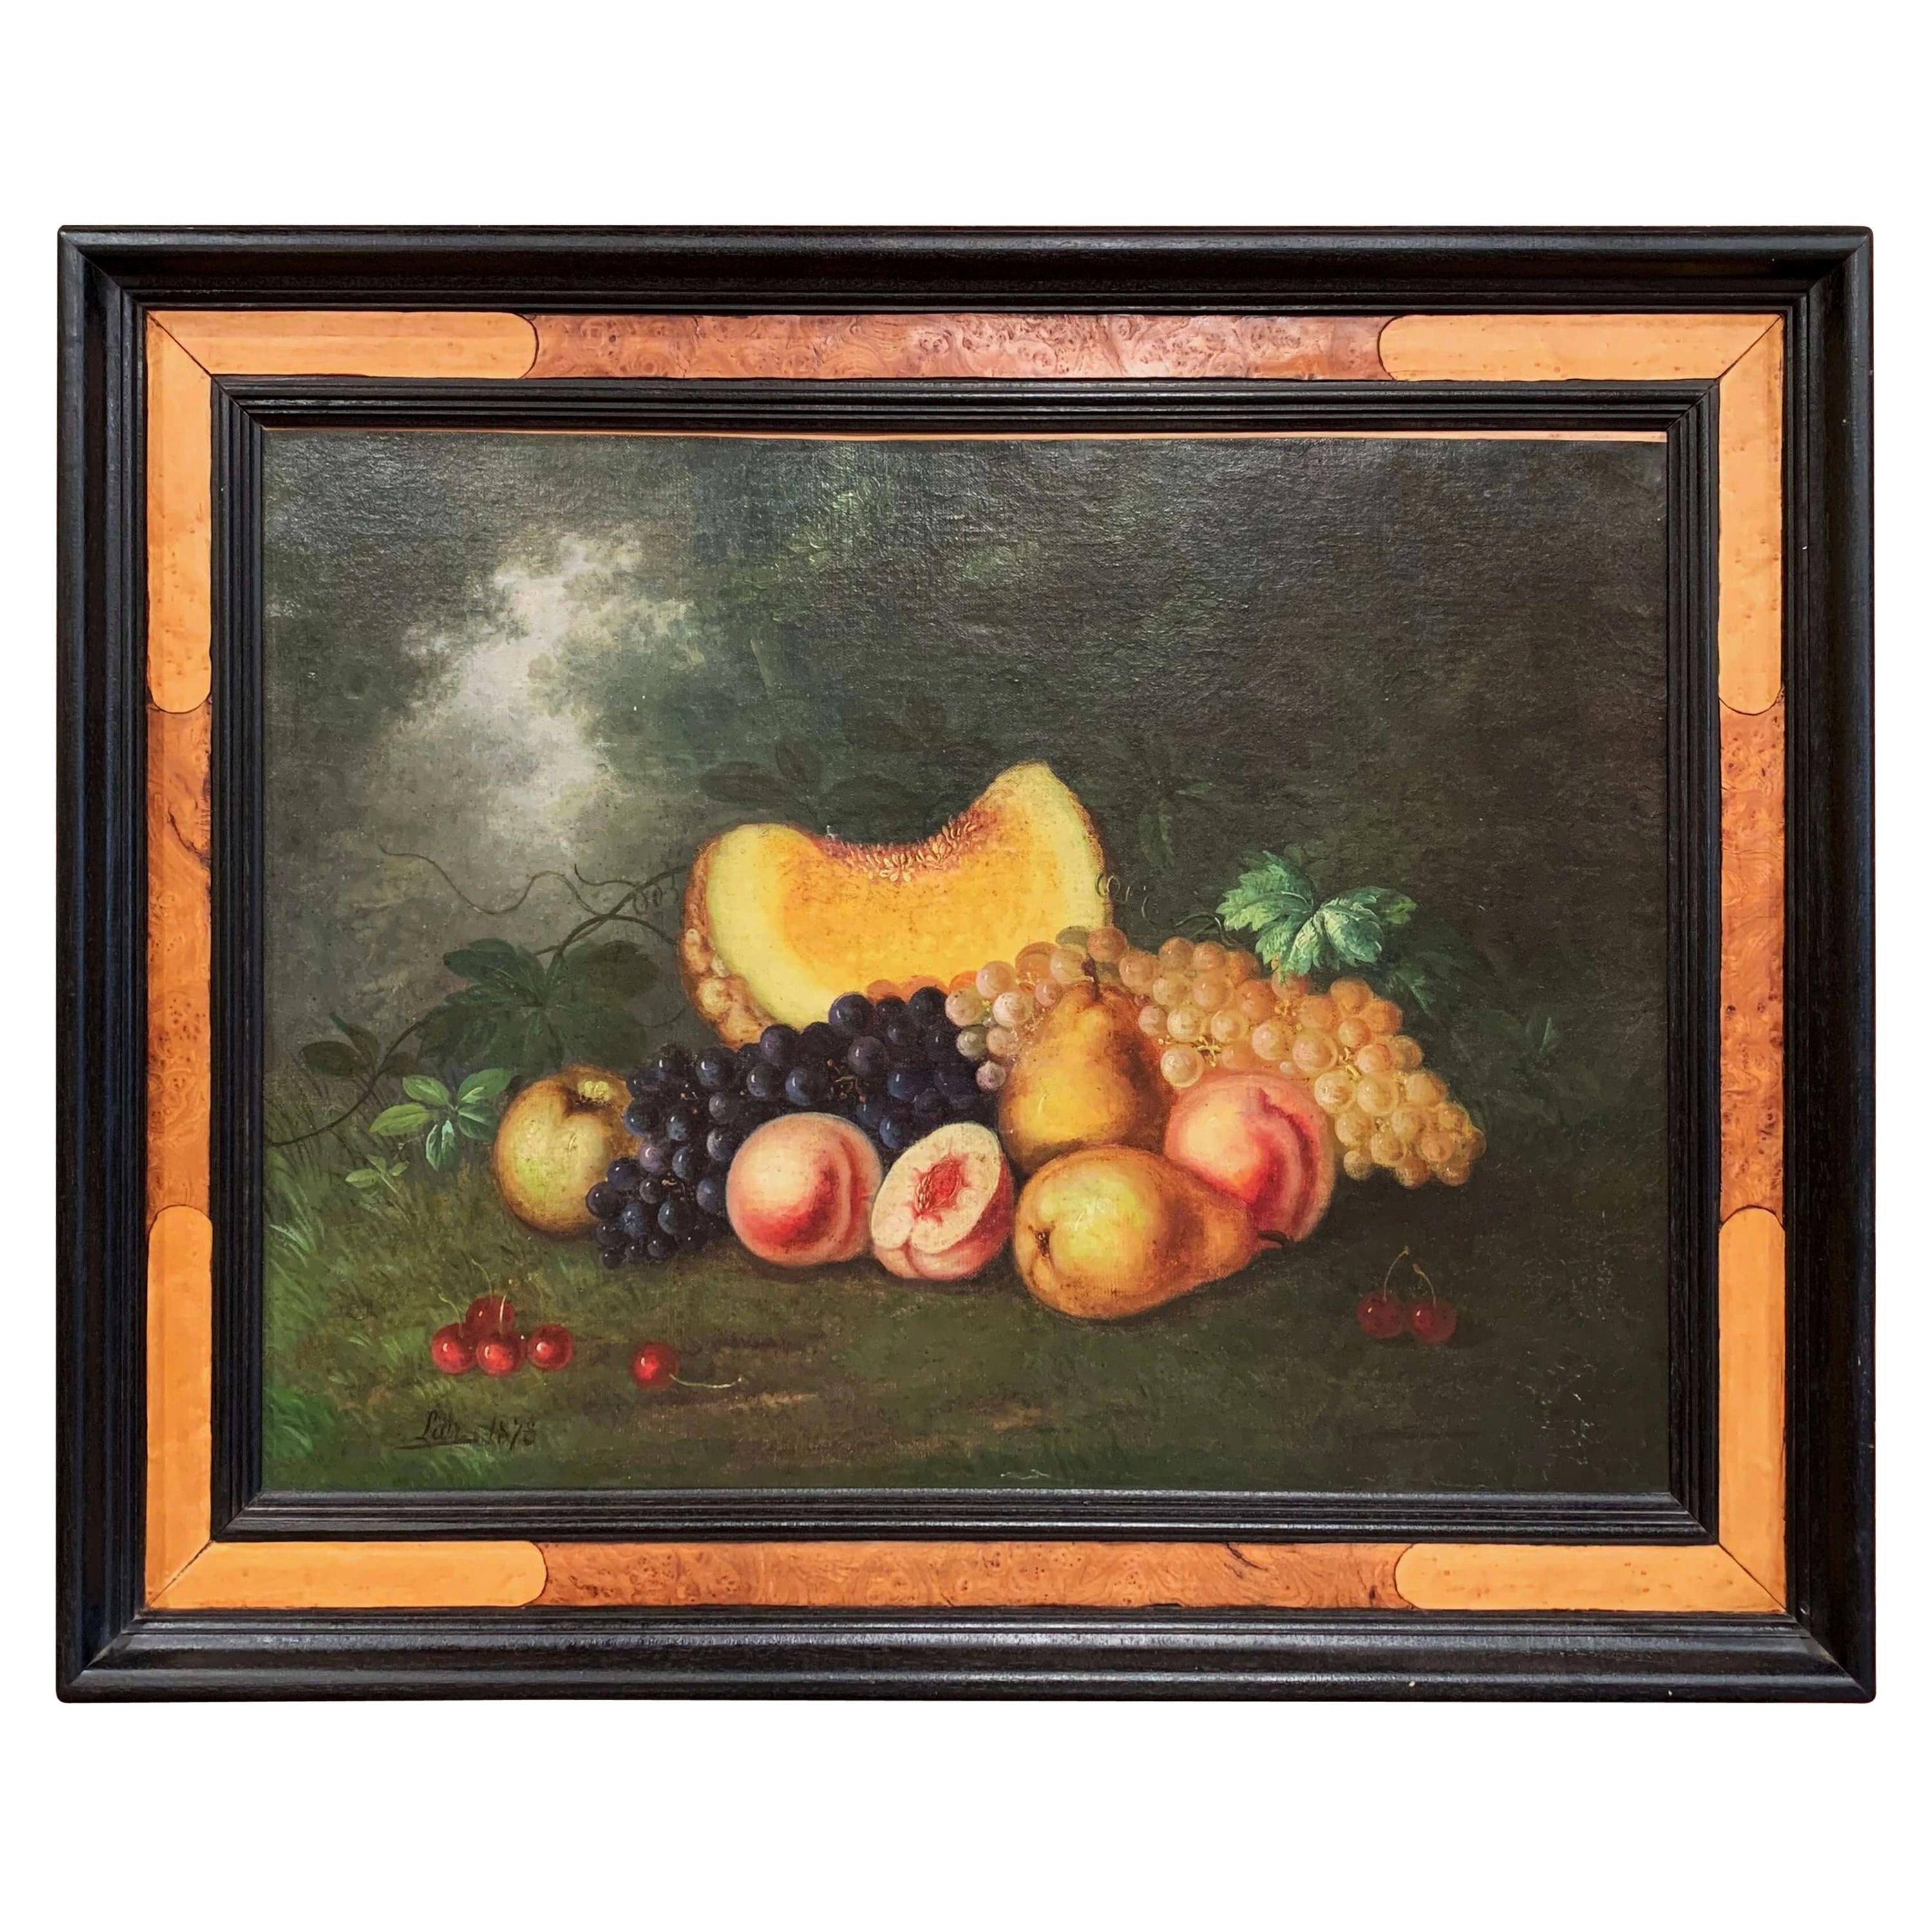 19th Century French Still Life Oil Painting on Canvas Signed and Dated 1878